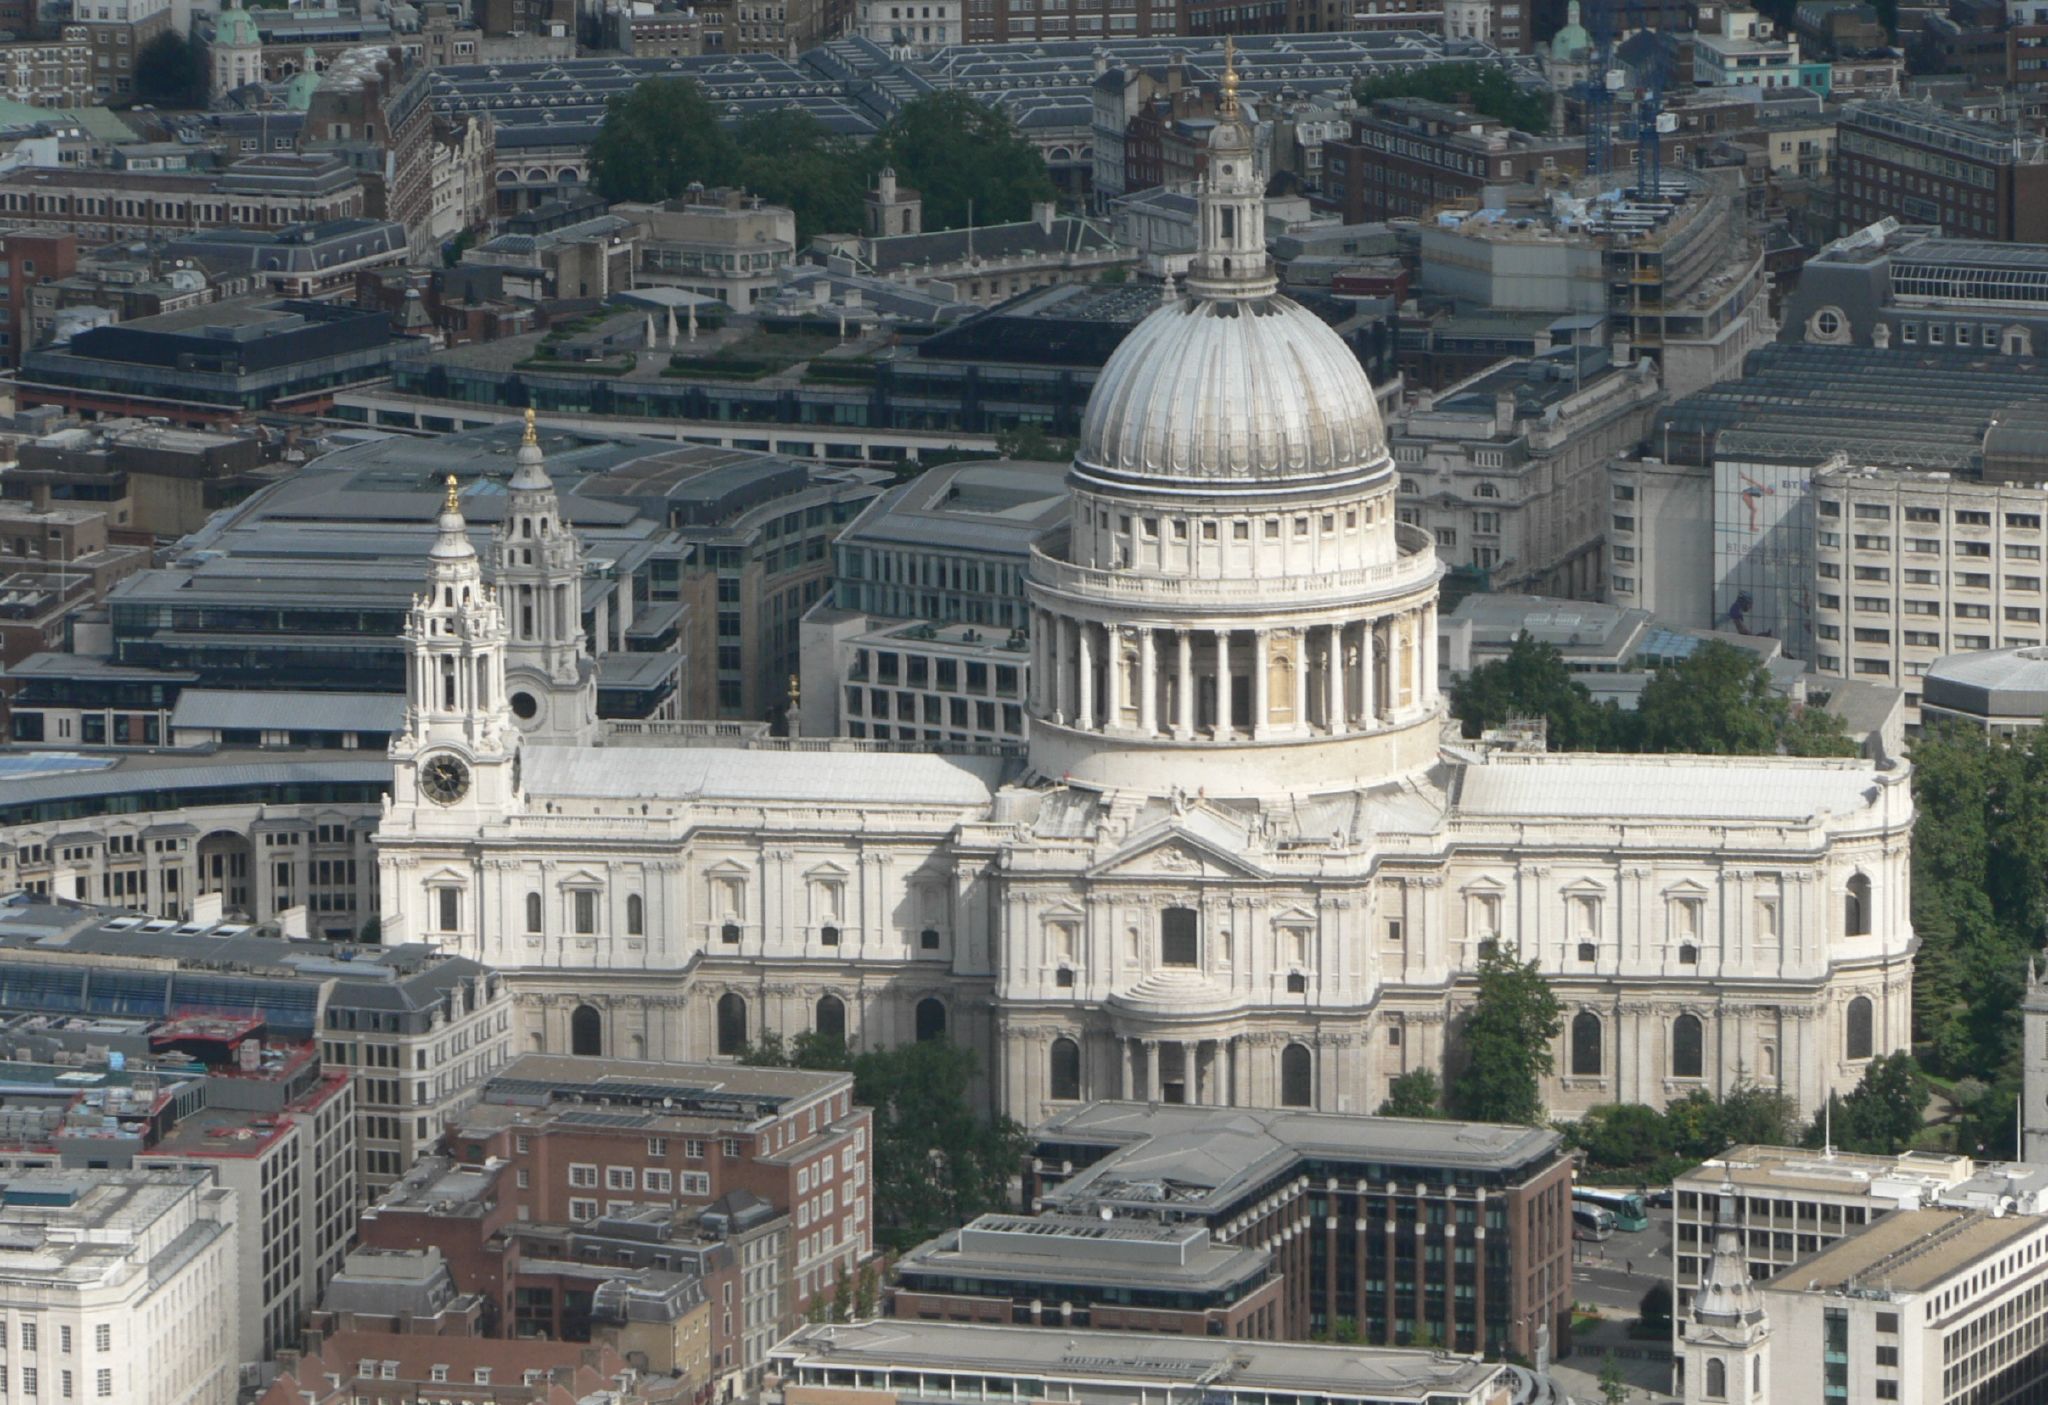 https://www.yizuo-media.com/albums/albums/userpics/10003/london_St_Paul27s_Cathedral.jpg